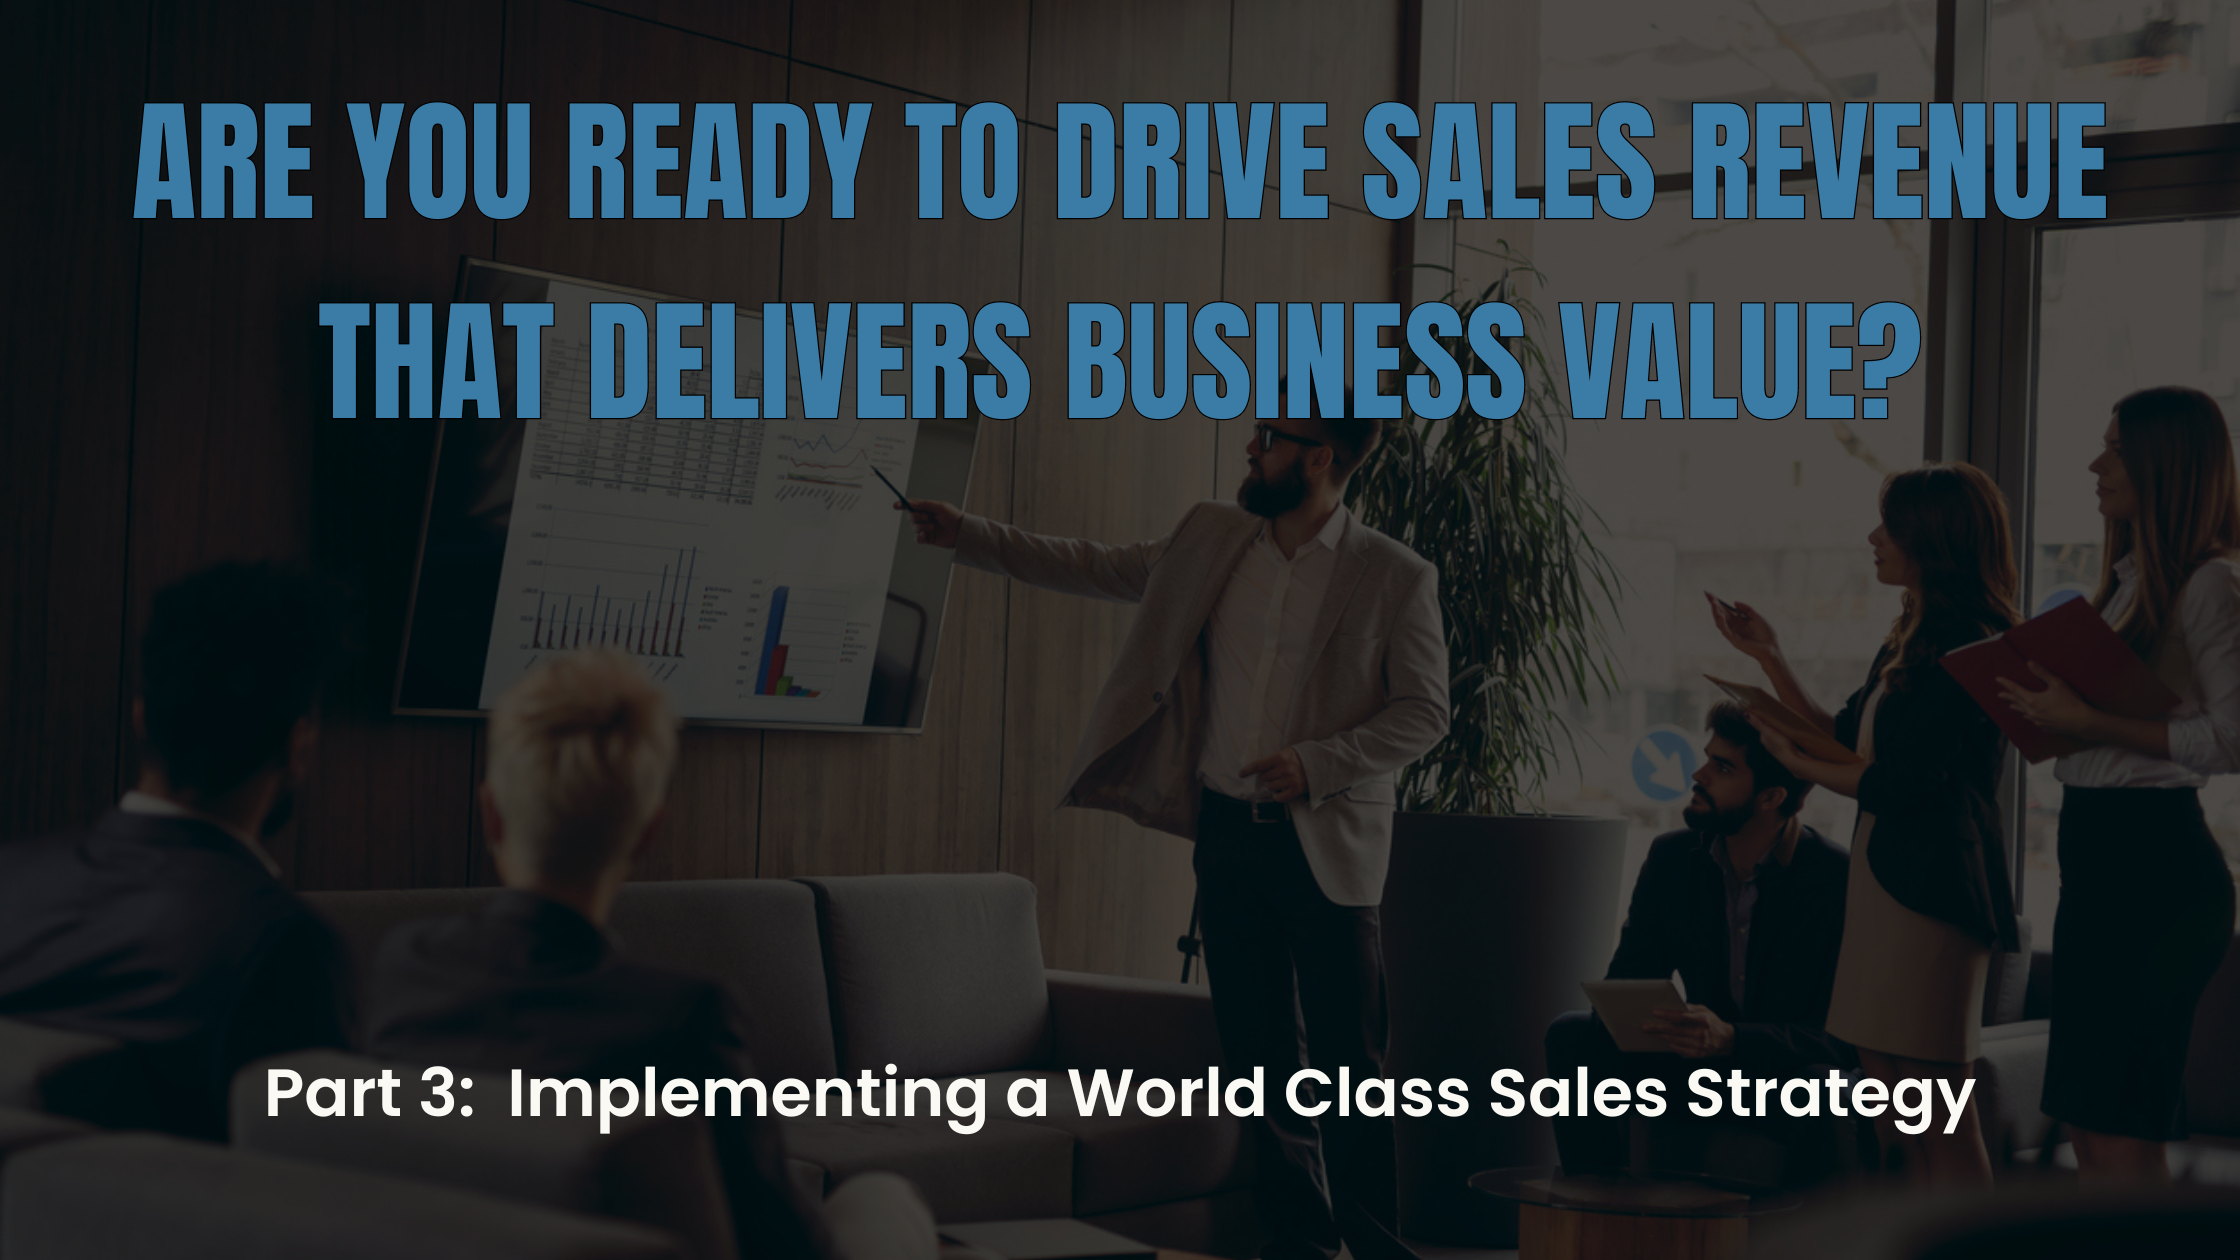 Learn How To Drive Sales Revenue That Delivers Business Value - Part 3: Implementing a World Class Sales Strategy